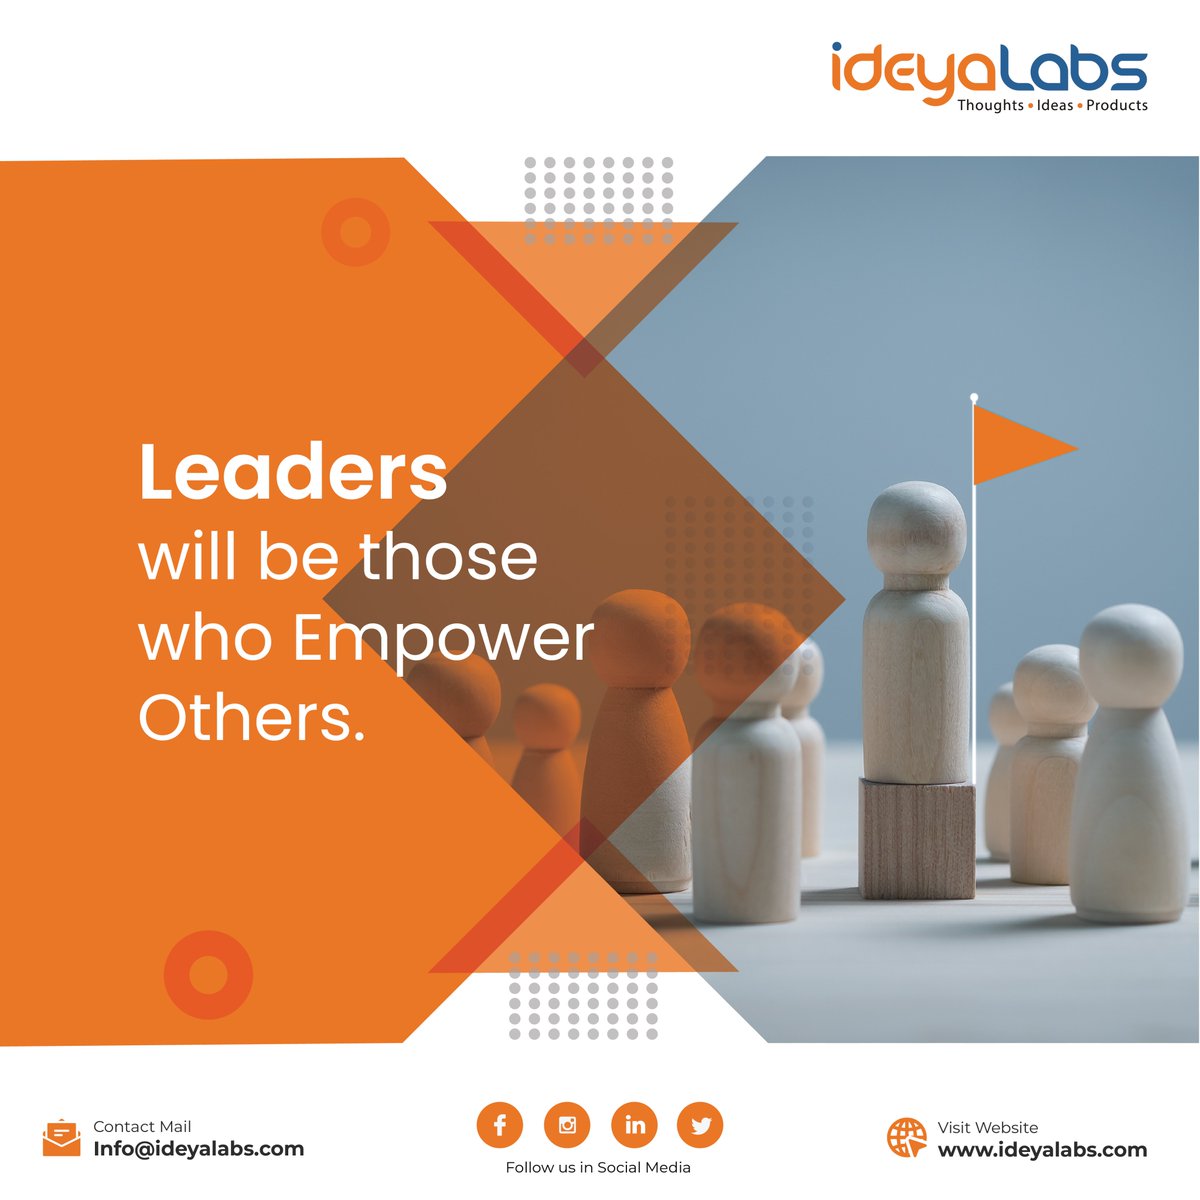 'Leaders will be those who empower others.'
#Ideyalabs #ceo #thoughtleadership #leadershipskills